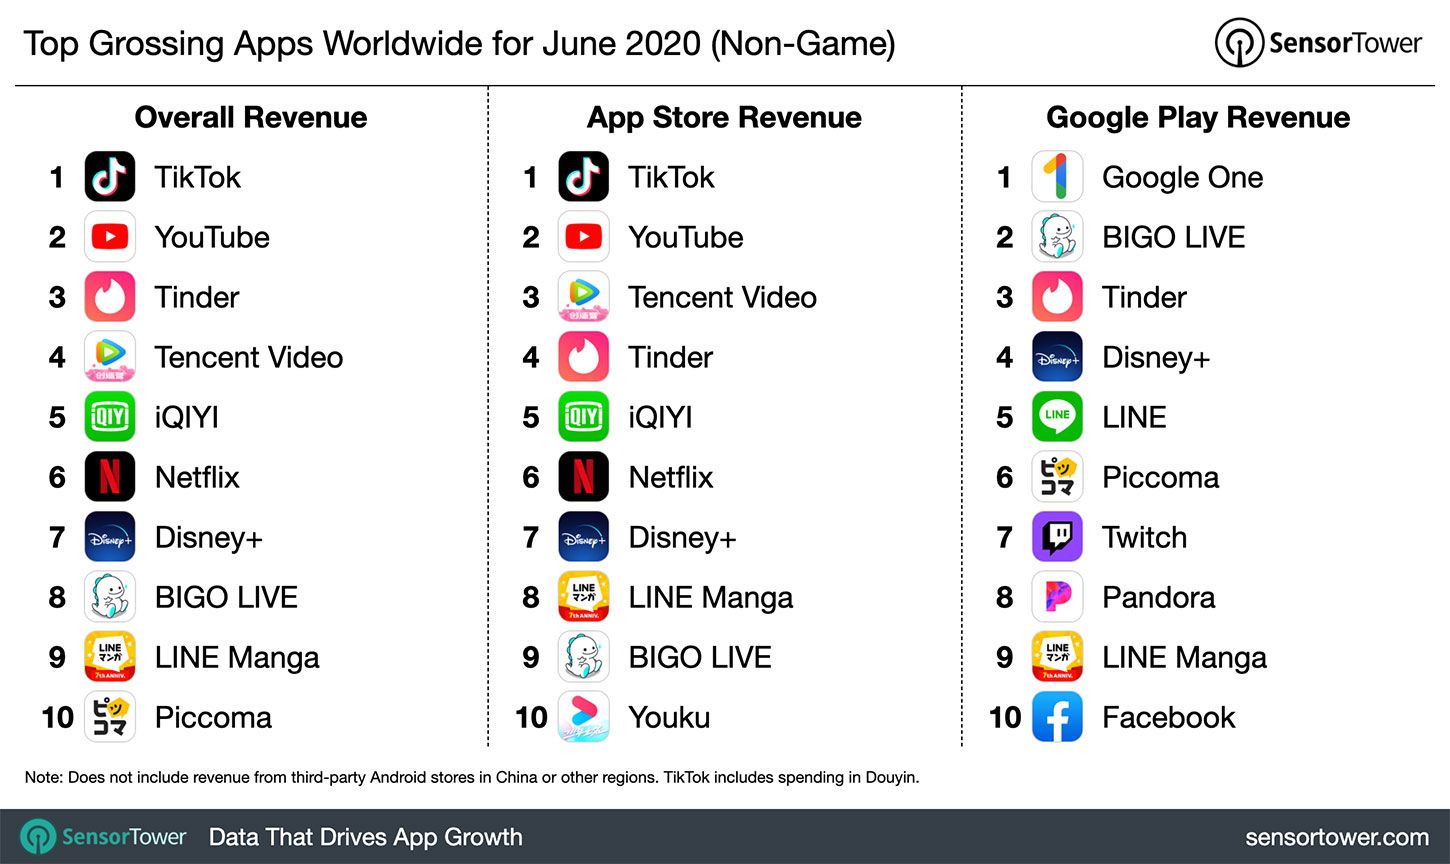 Top apps that earned the most revenue